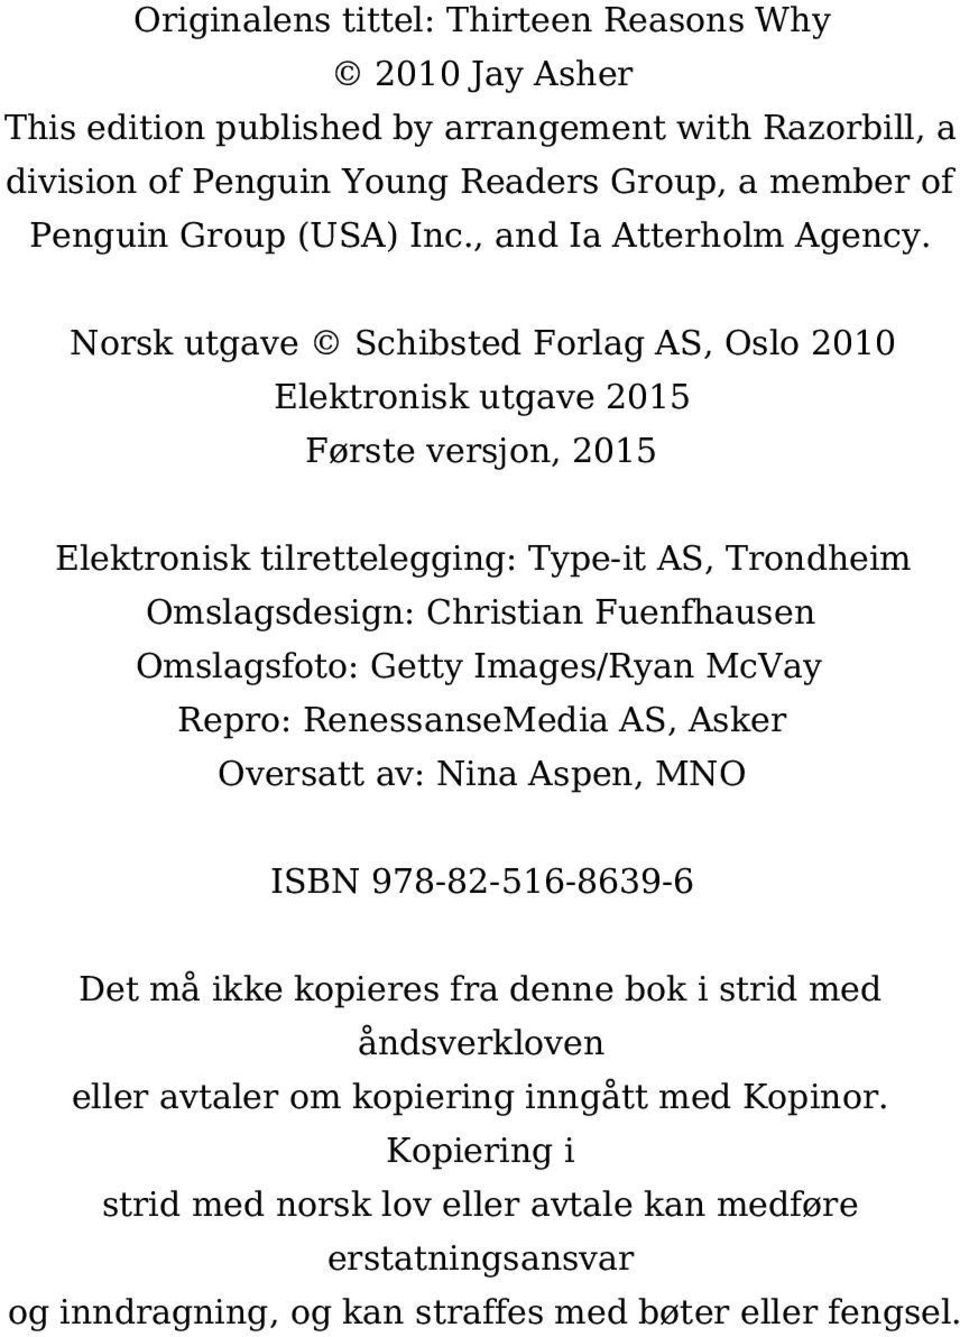 Norsk utgave Schibsted Forlag AS, Oslo 2010 Elektronisk utgave 2015 Første versjon, 2015 Elektronisk tilrettelegging: Type-it AS, Trondheim Omslagsdesign: Christian Fuenfhausen